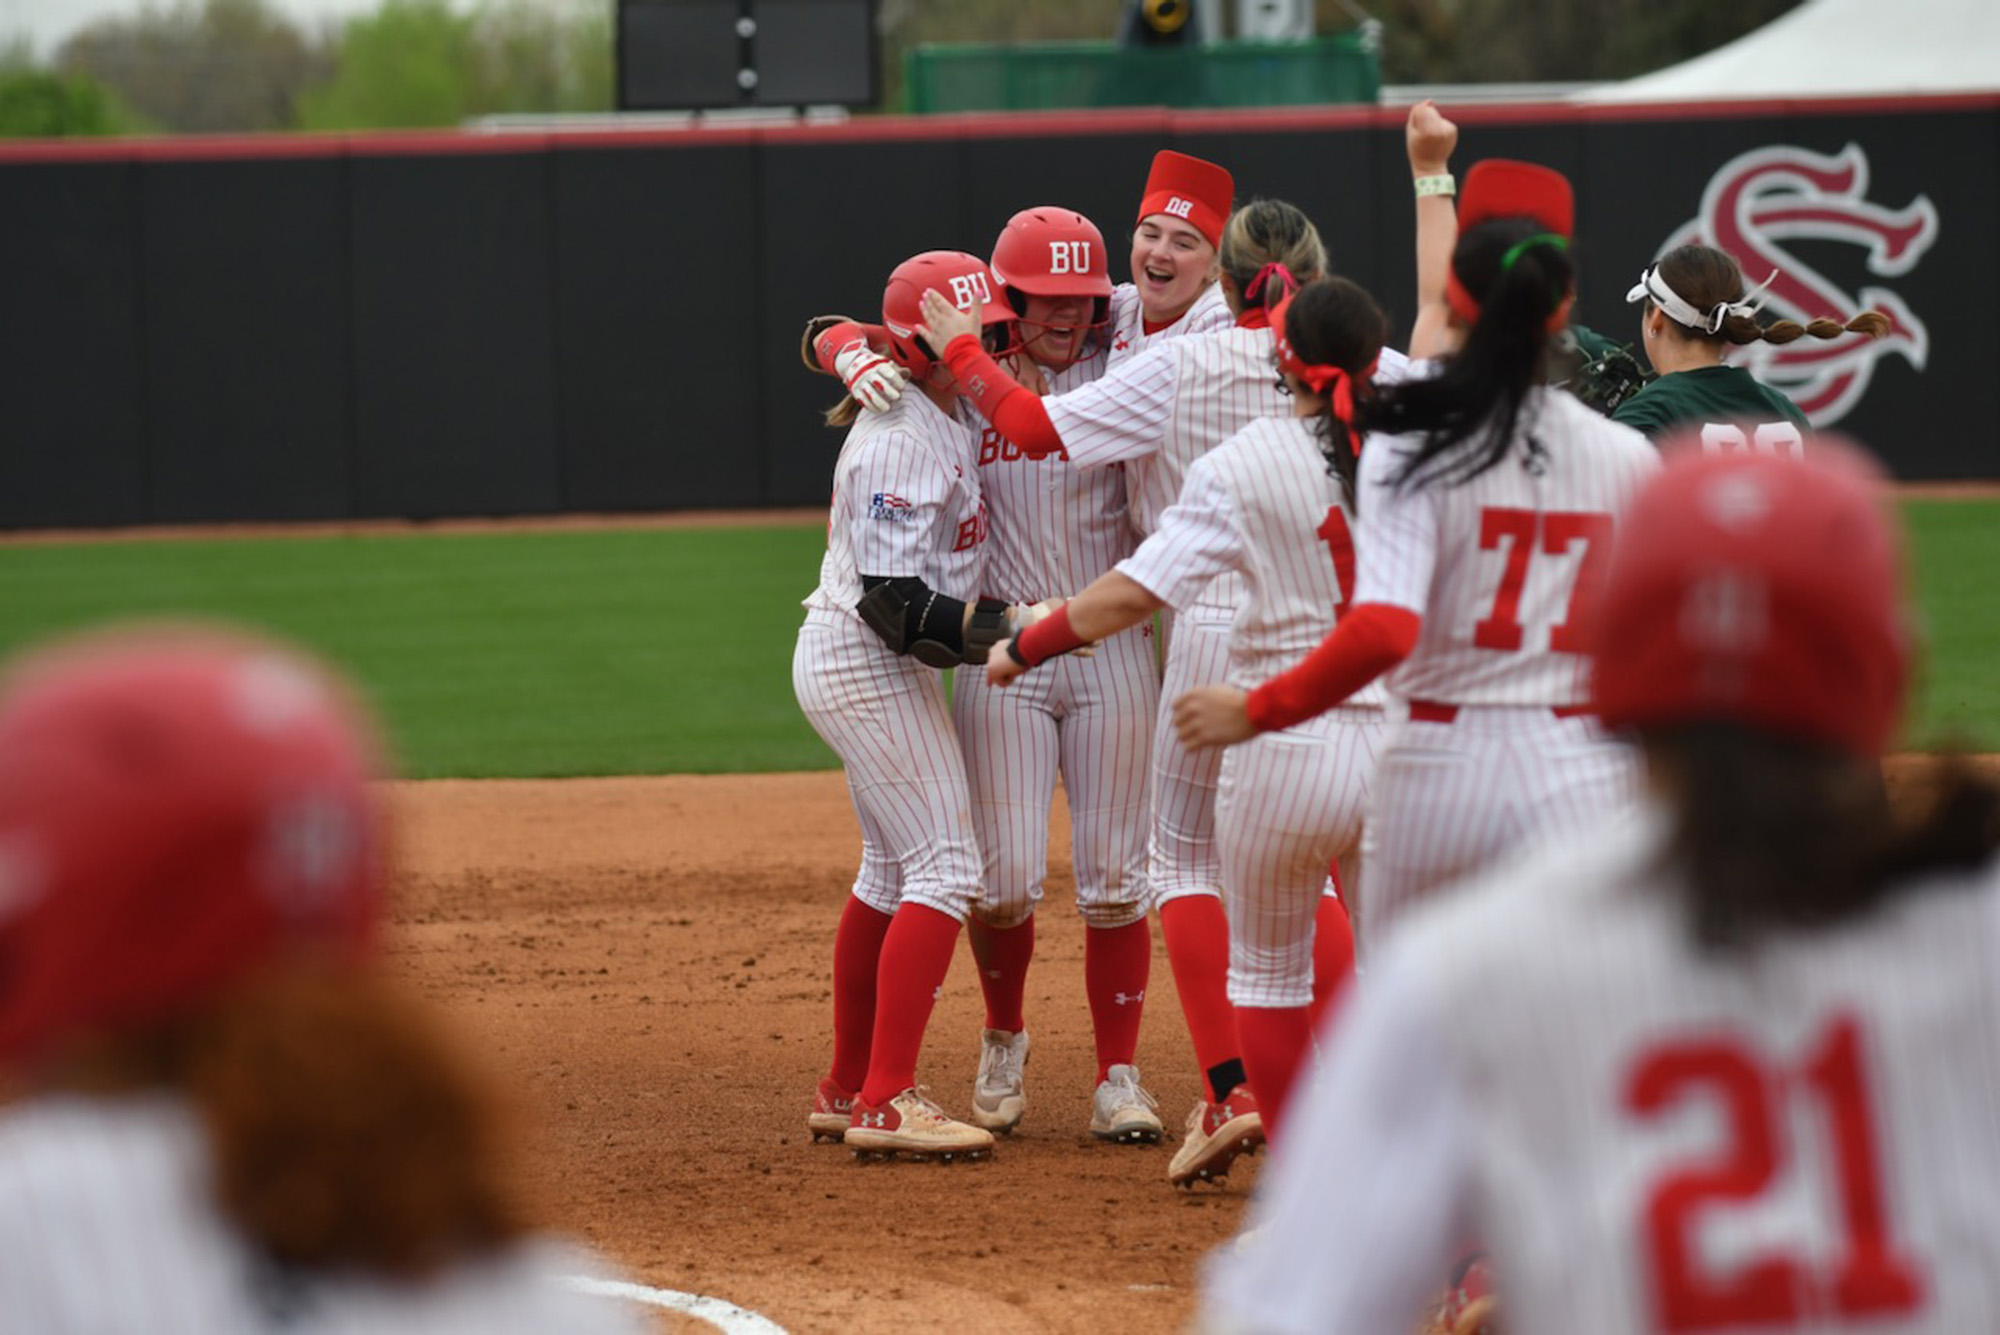 Photo: A softball team celebrating. They are wearing white uniforms with red accents